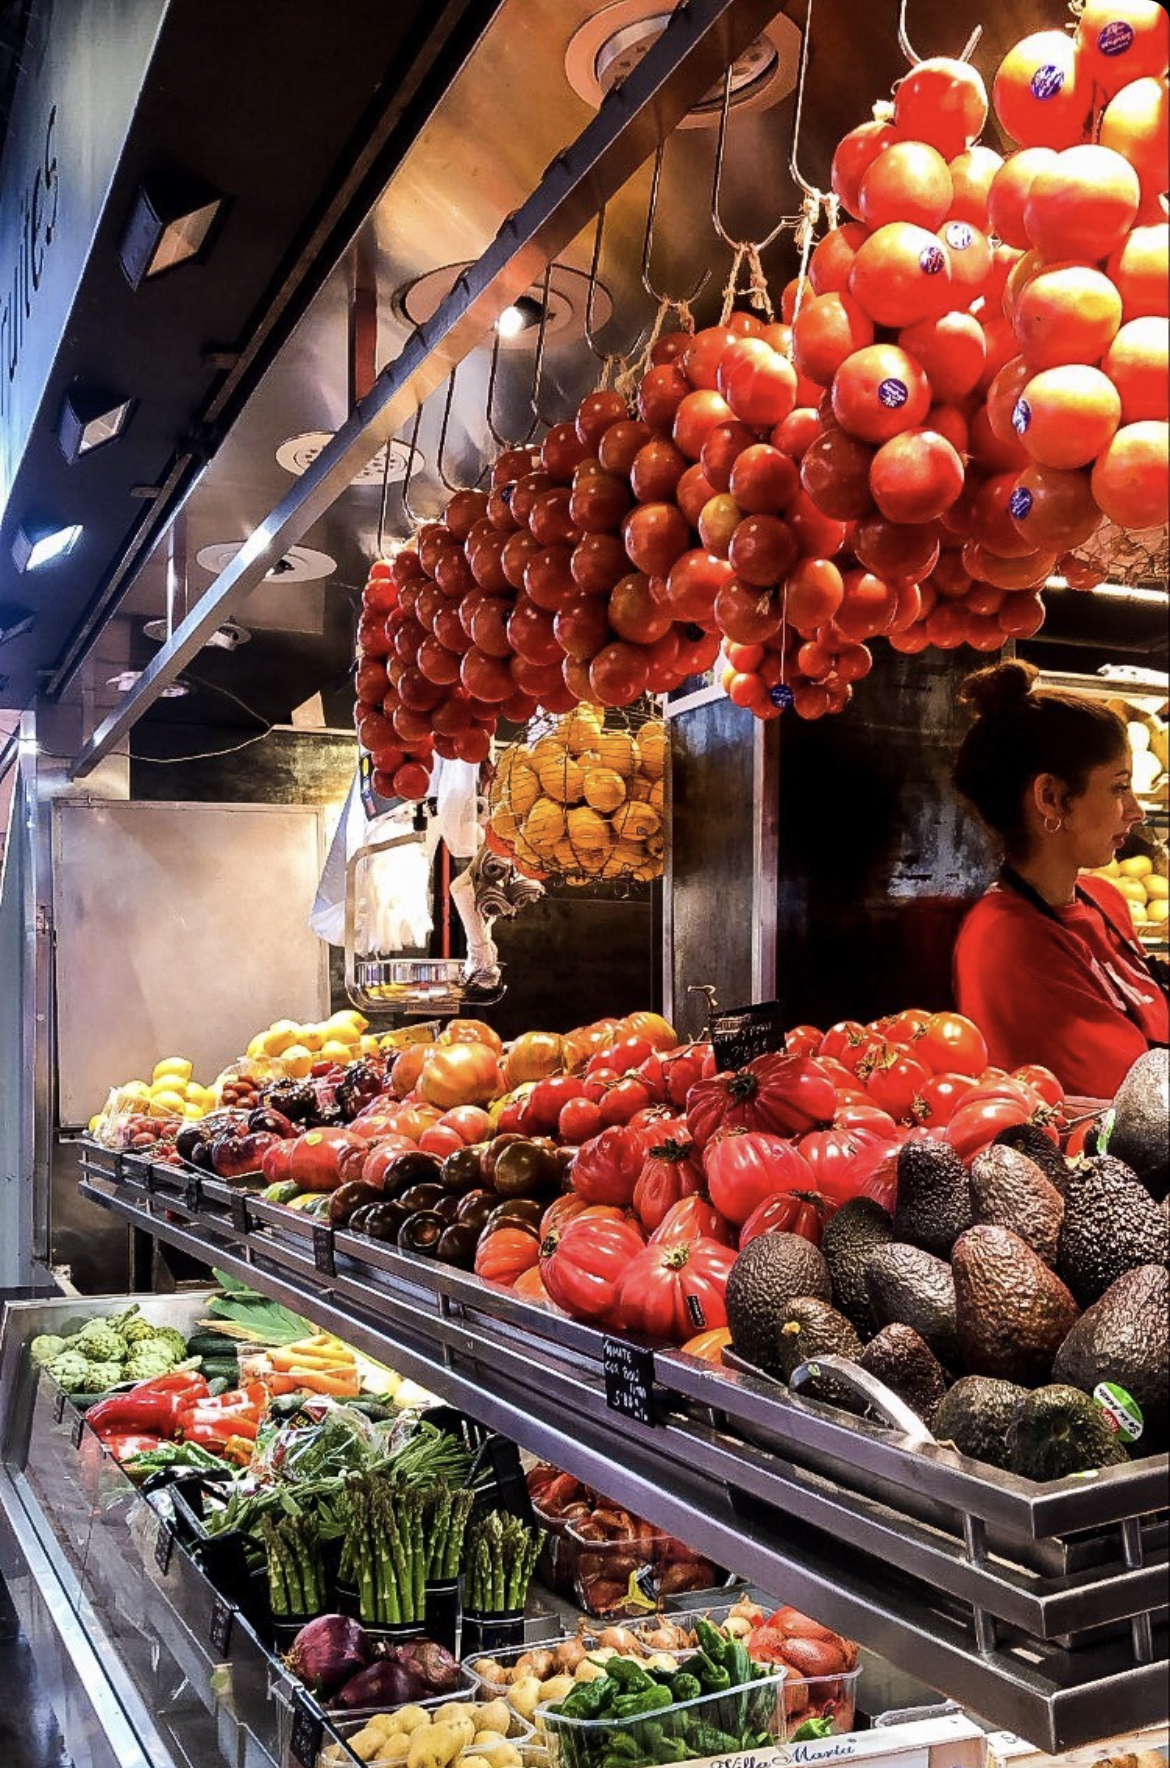 barcelona central market, fresh produce in rows